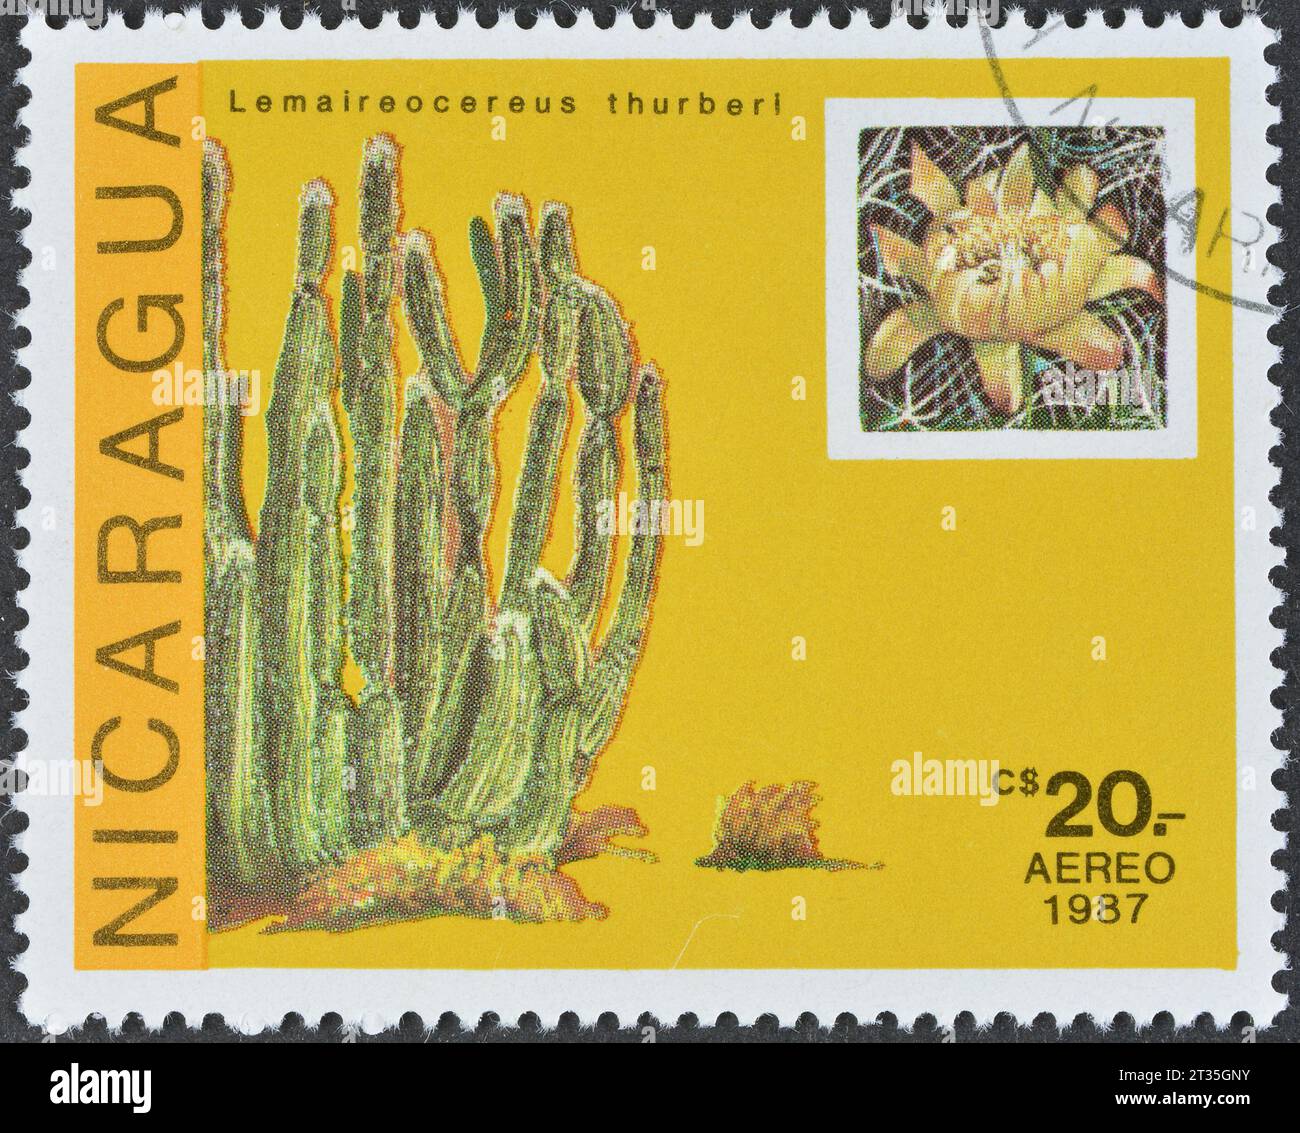 Cancelled postage stamp printed by Nicaragua, that shows Lemaireocereus thurberi - the organ pipe cactus, circa 1987. Stock Photo